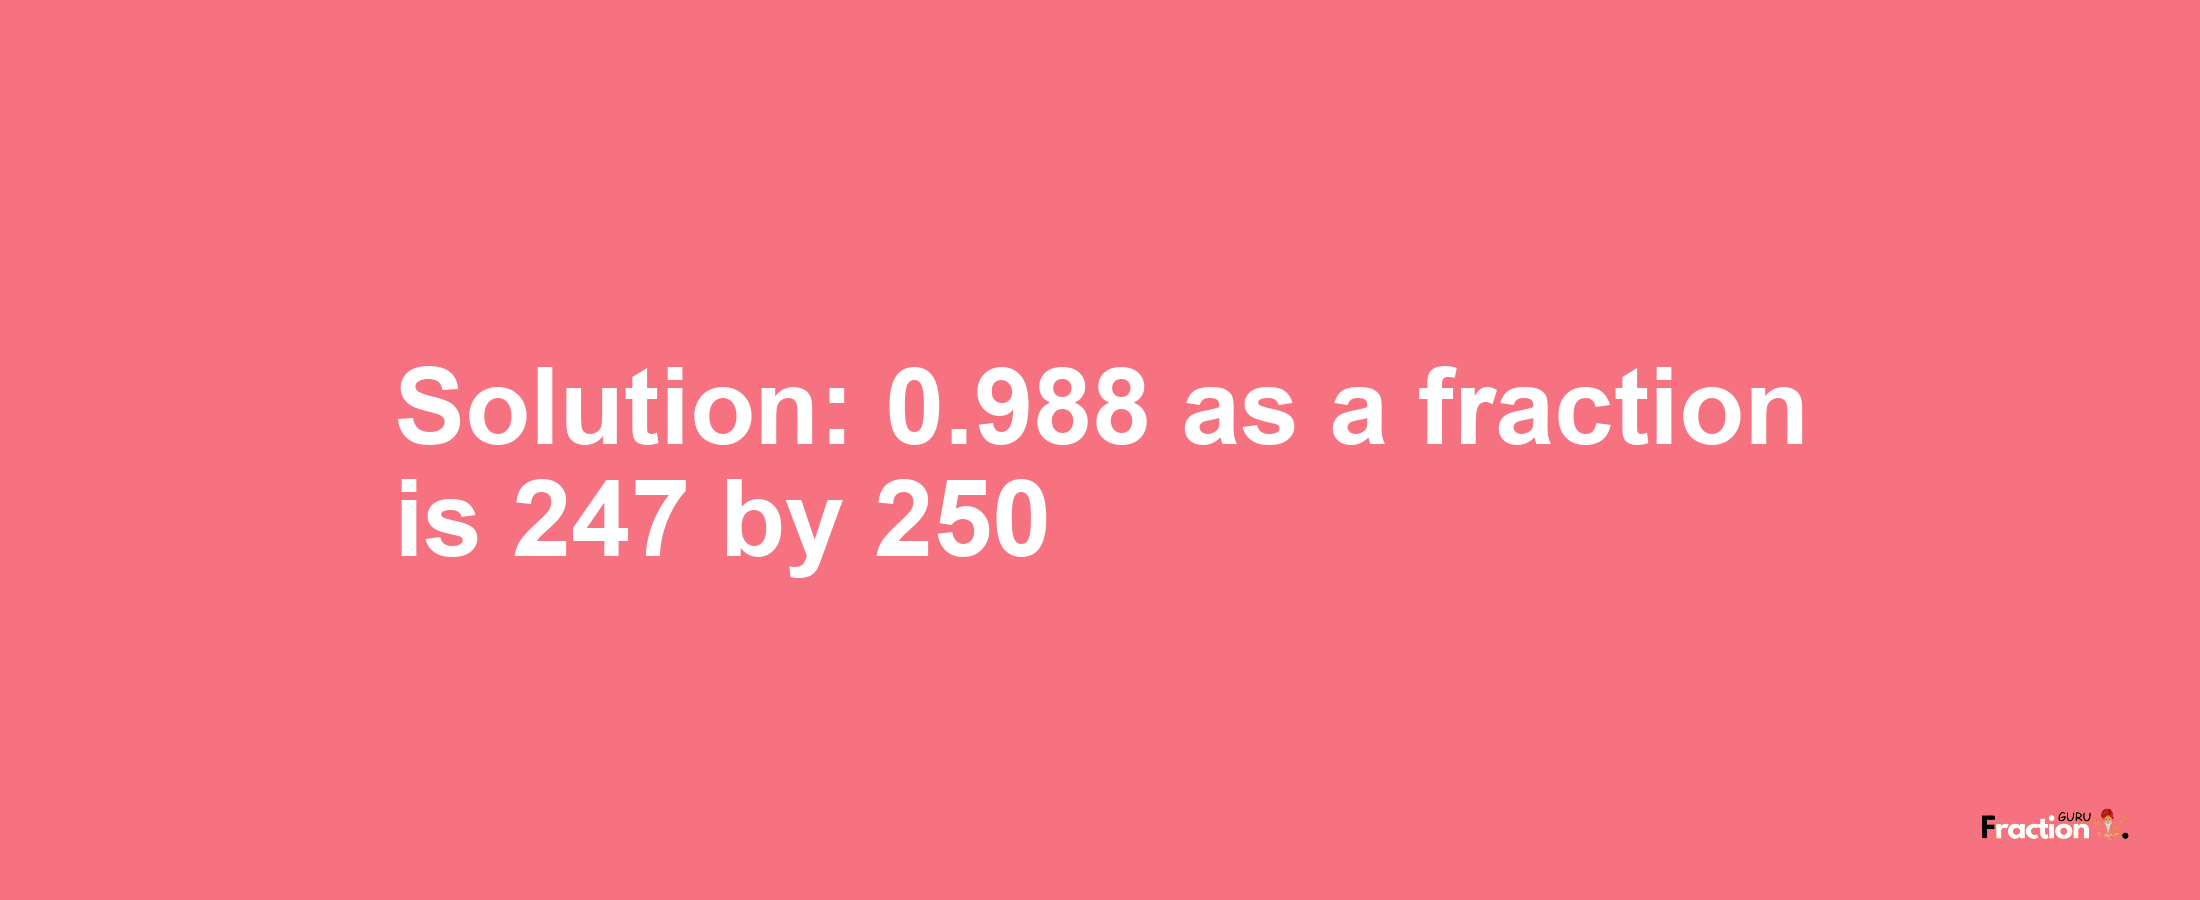 Solution:0.988 as a fraction is 247/250